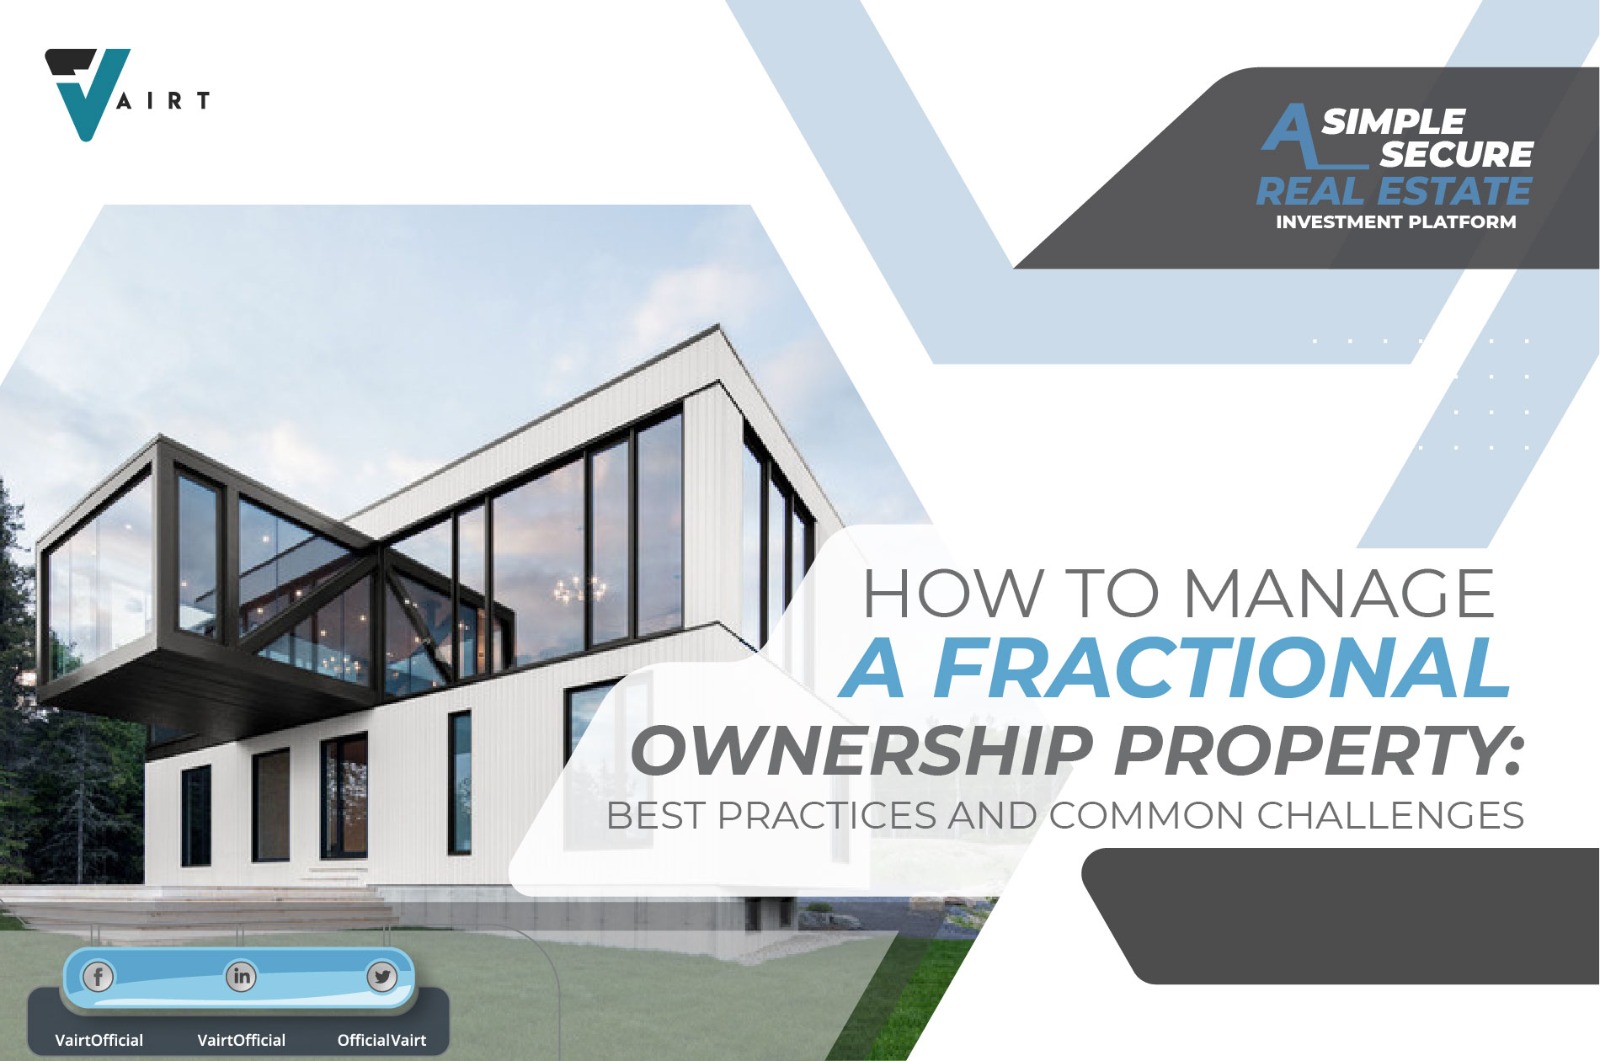 How to Manage a Fractional Ownership Property